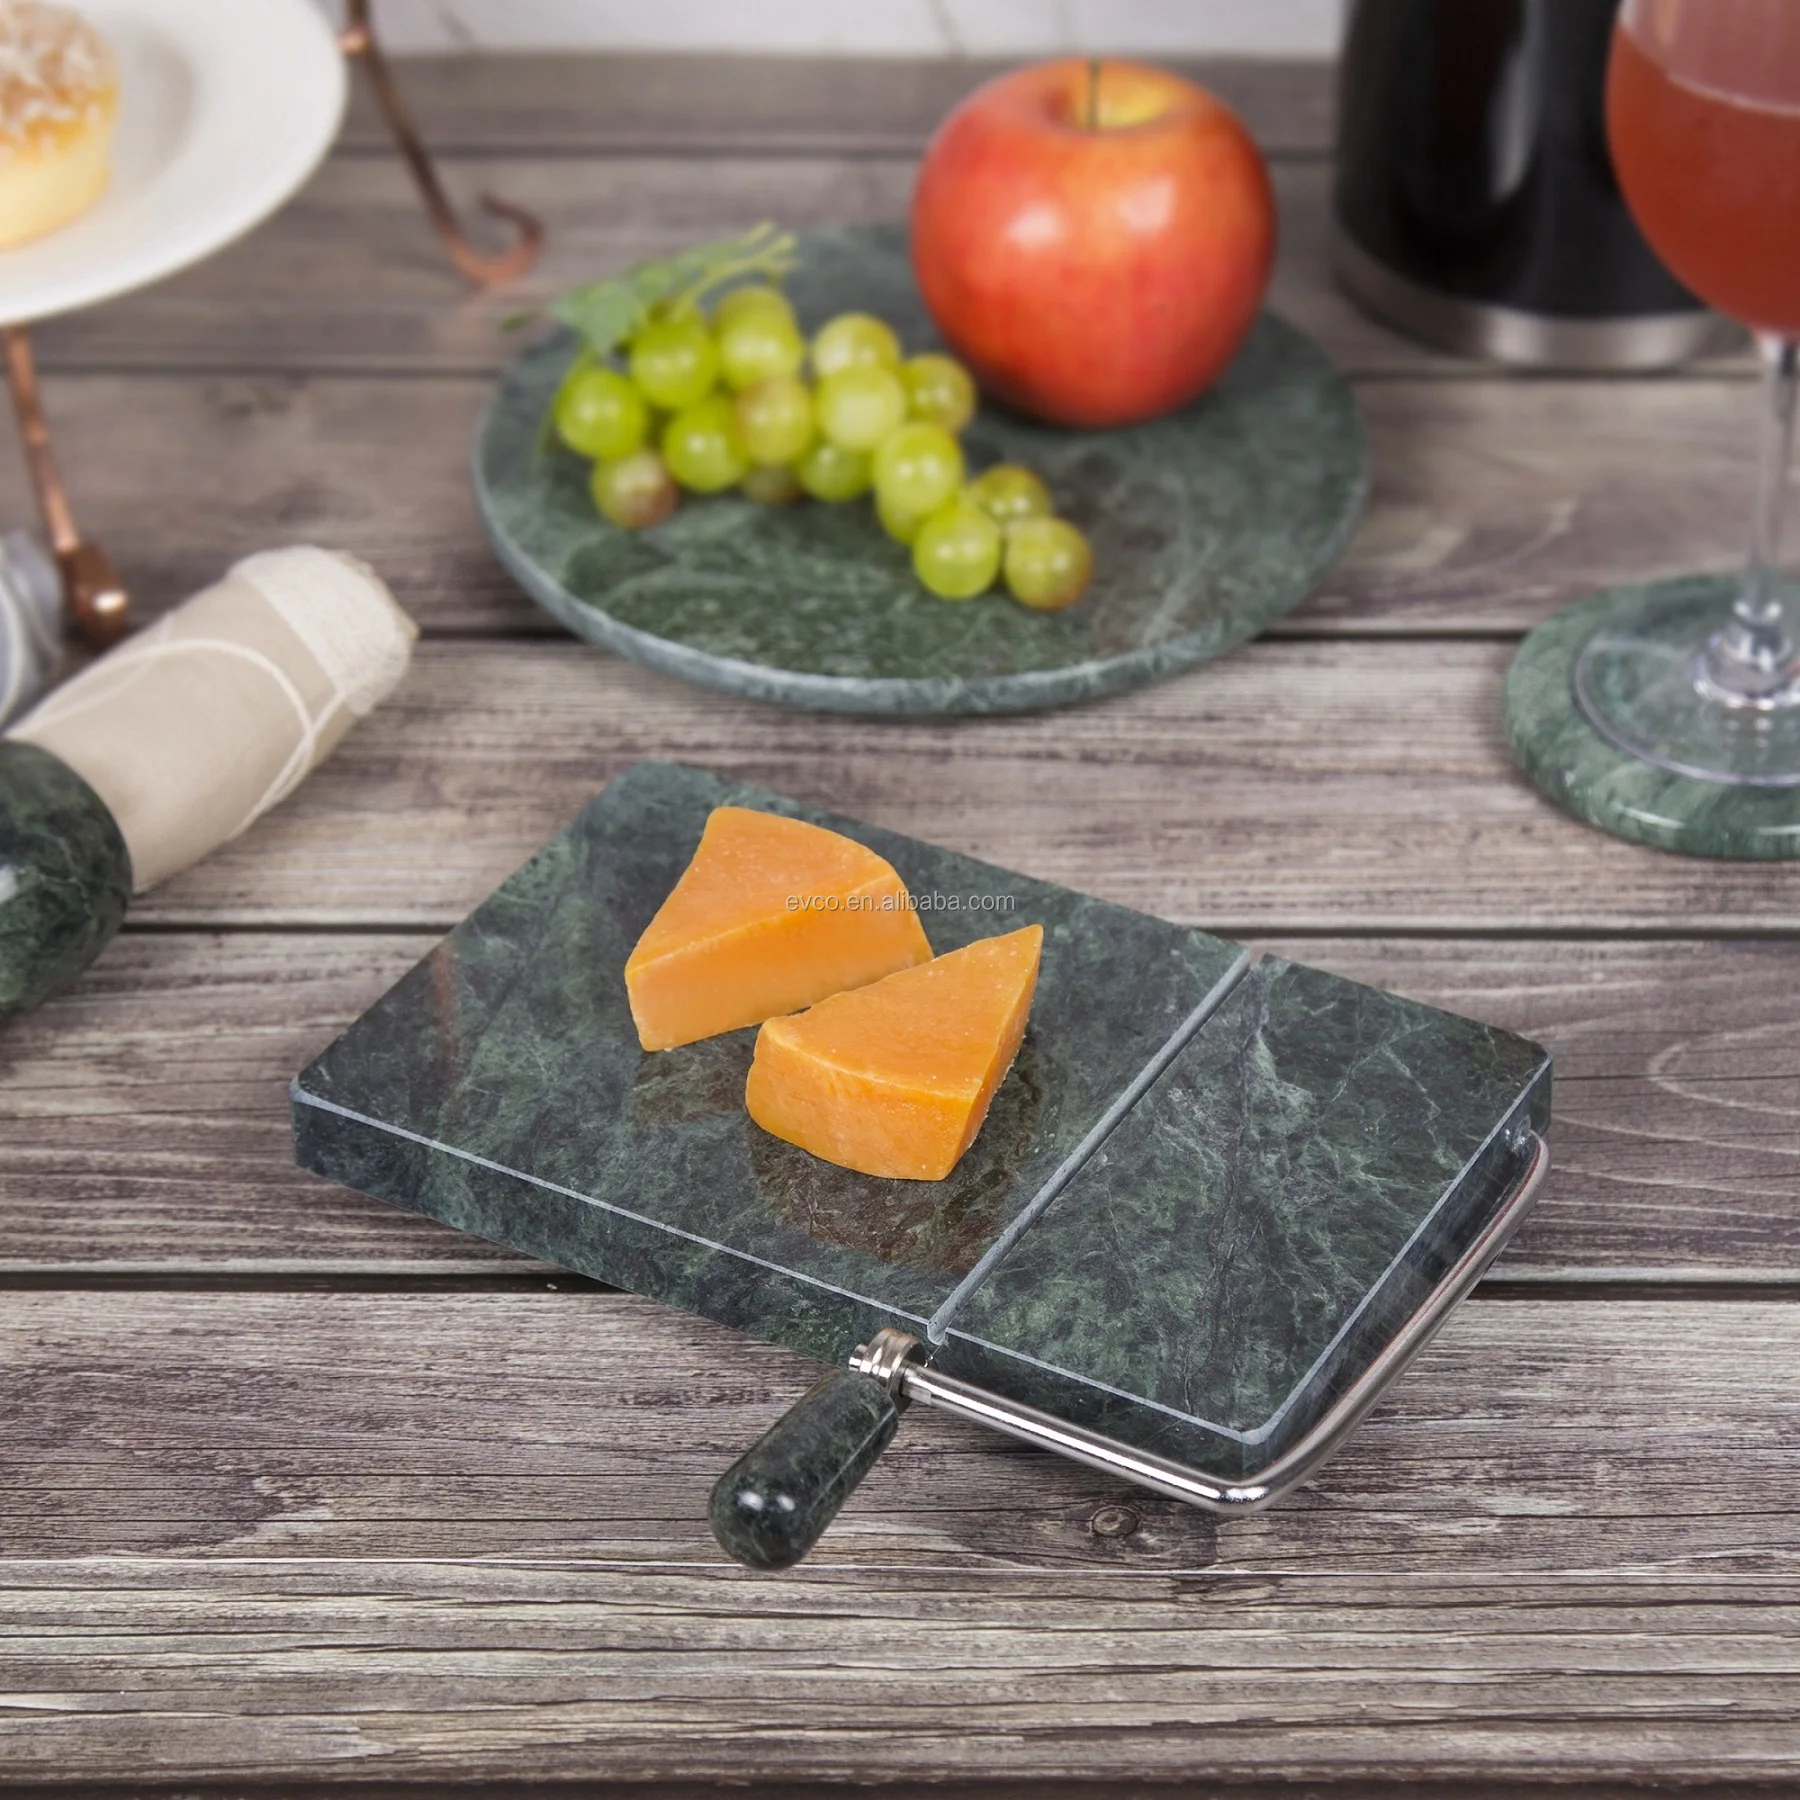 Natural Green Marble Cheese Slicer